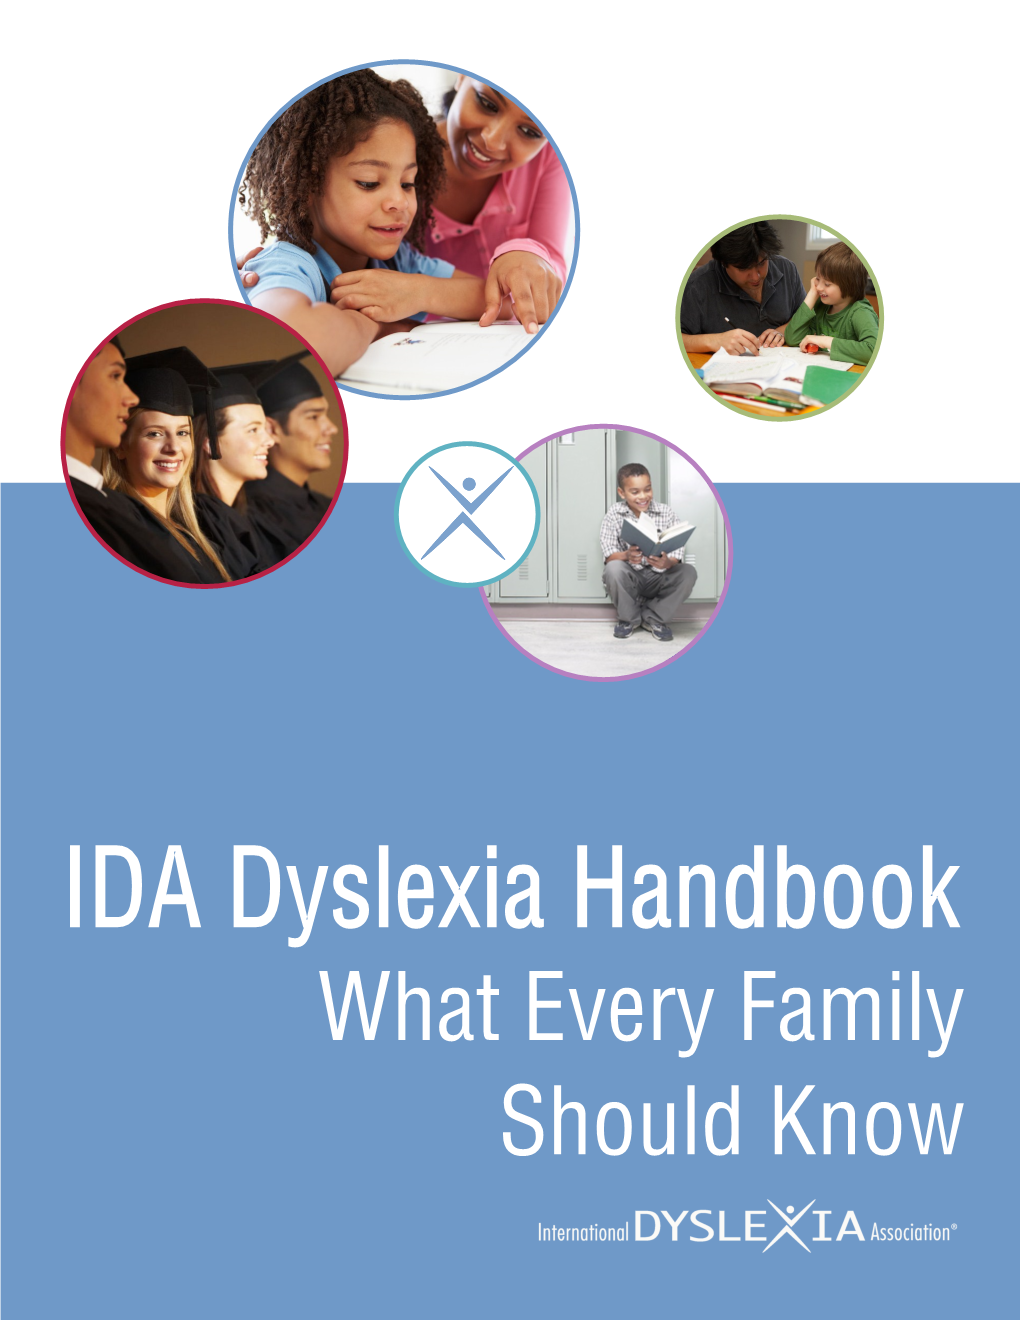 IDA Dyslexia Handbook: What Every Family Should Know